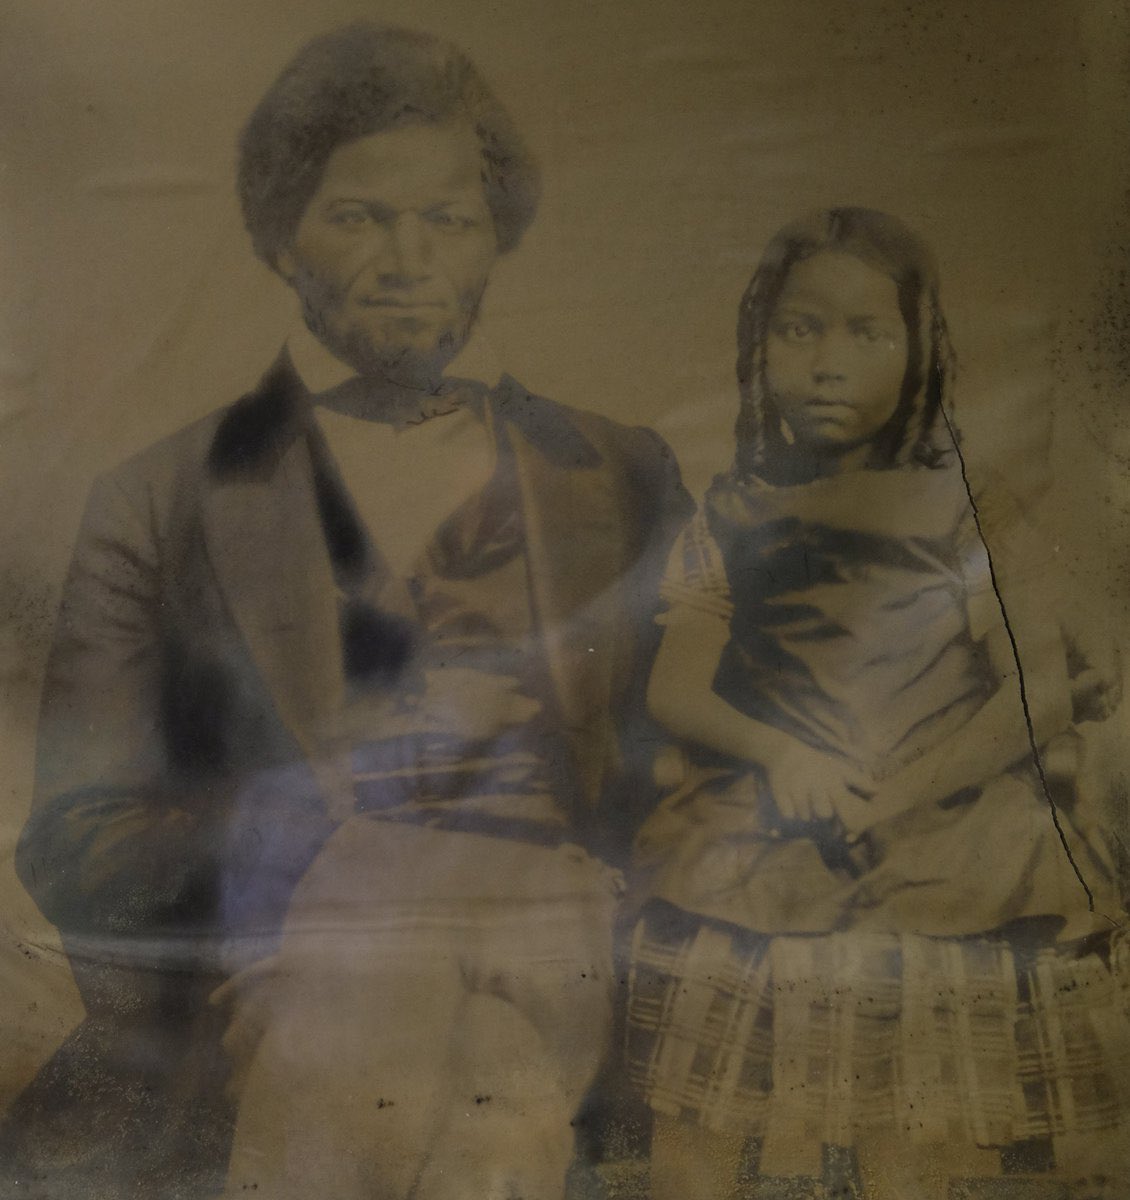 RT @BLKAmericans_: Frederick Douglass with his youngest daughter, Annie, who died in 1860 at the age of ten. https://t.co/pKXQPB4xtc